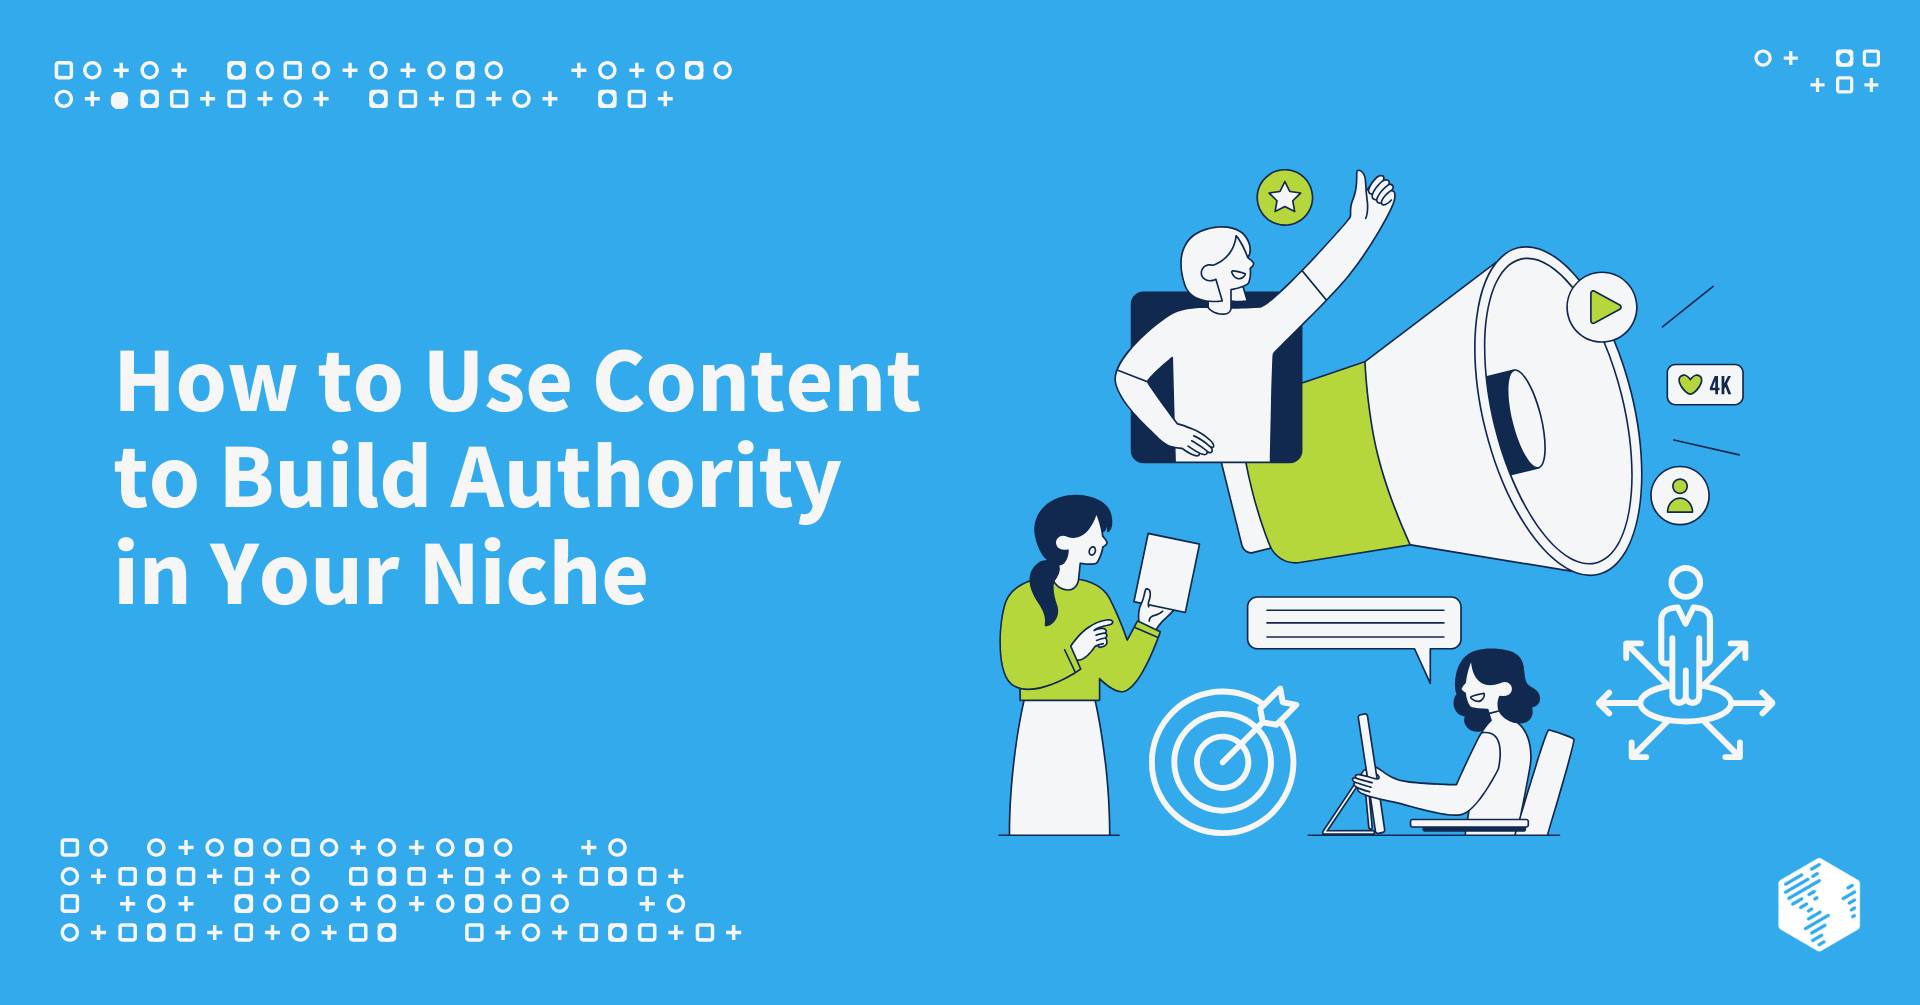 How to use content to build authority in your niche - image